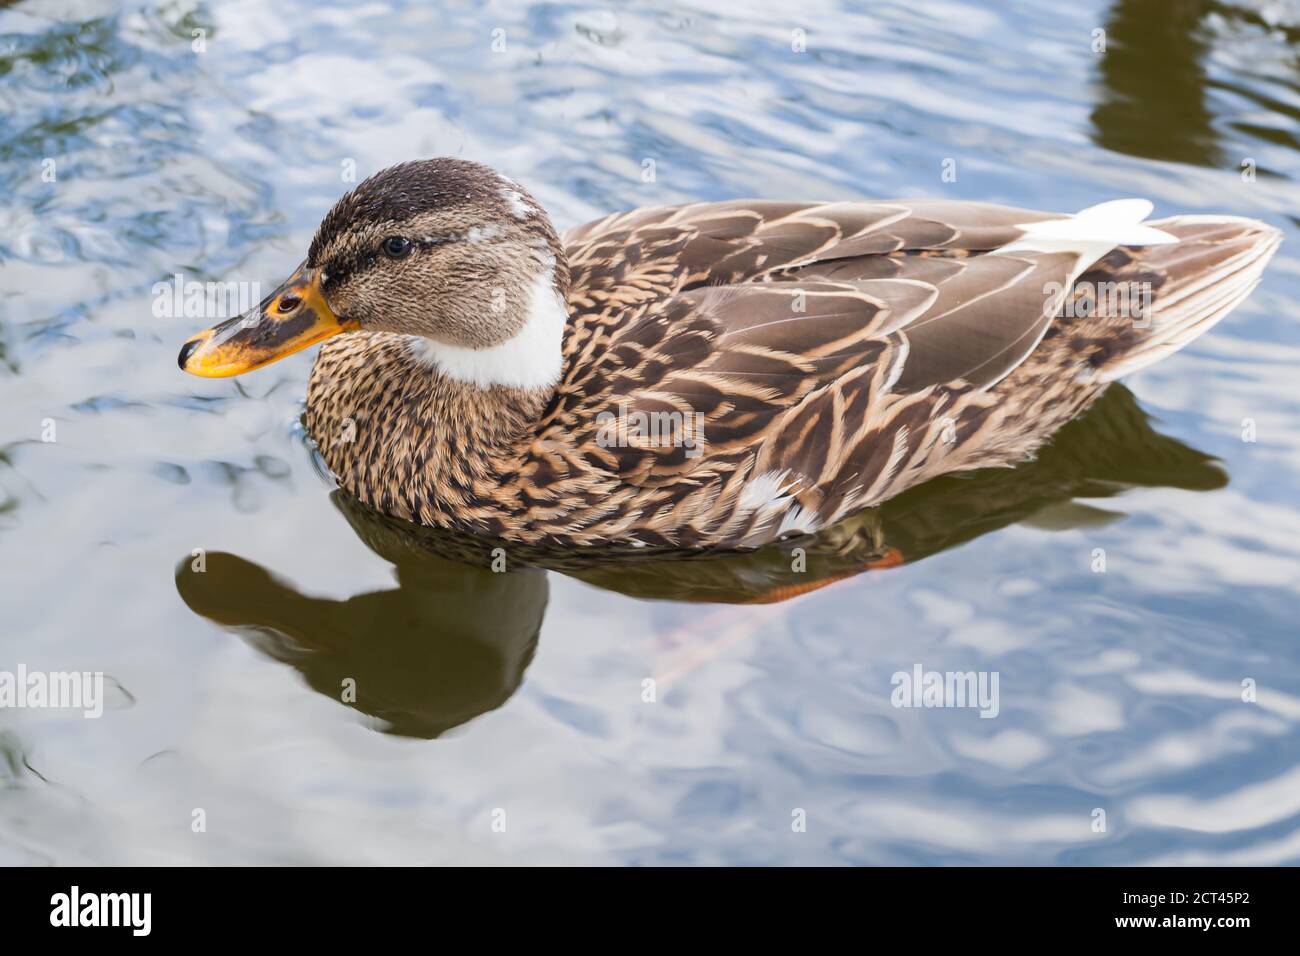 The mallard, a dabbling duck floating on water. Close up photo Stock Photo